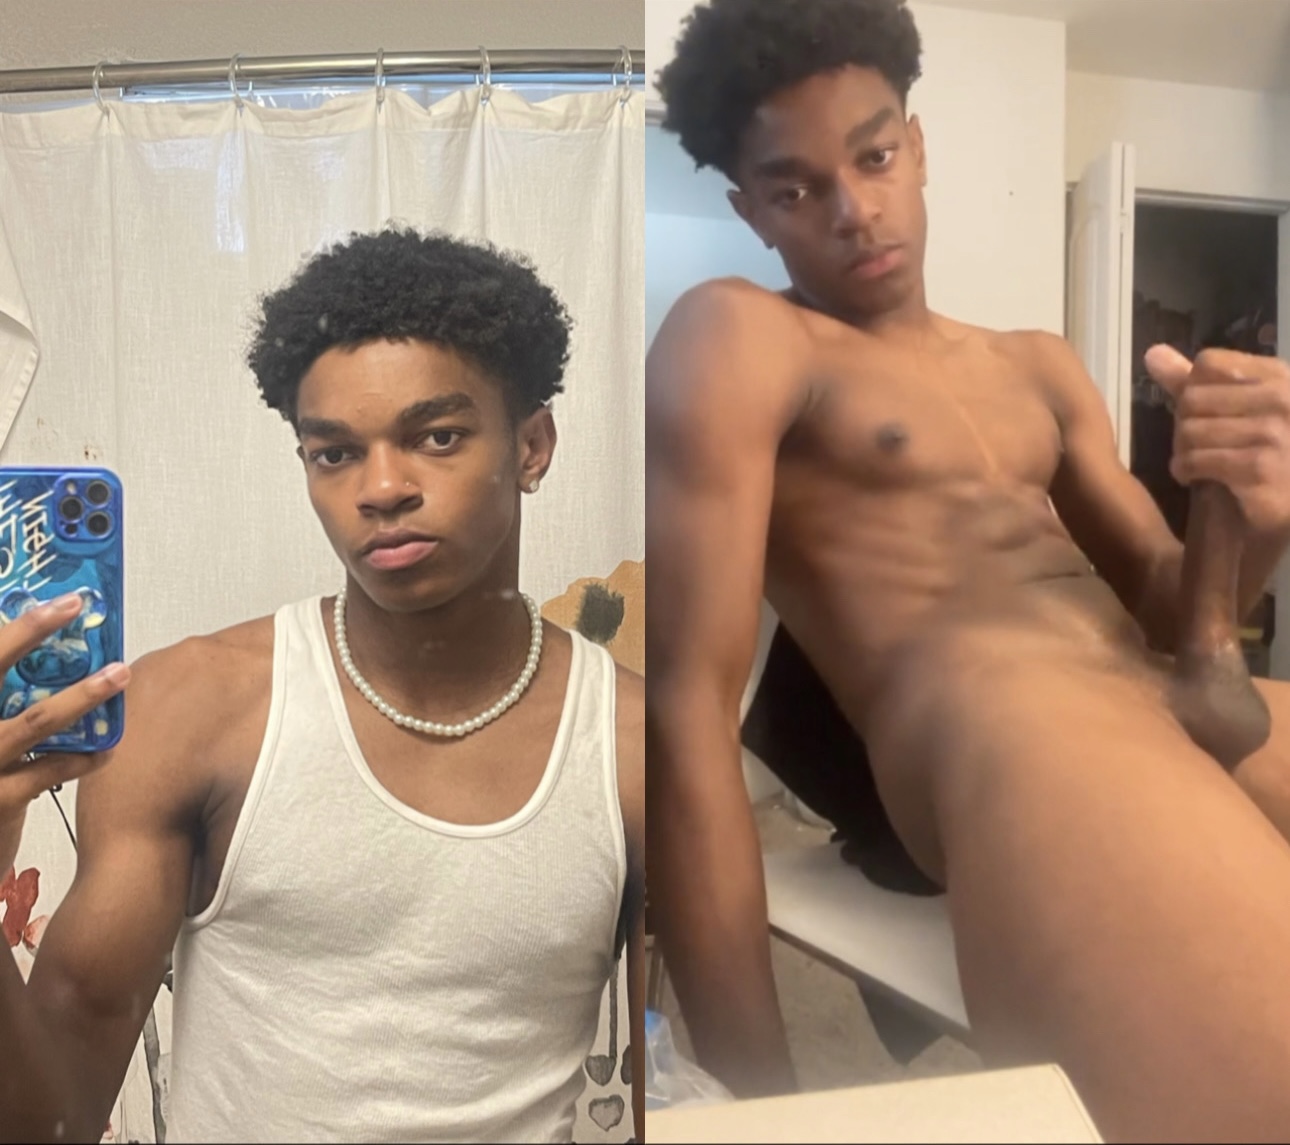 CUMPILATION* of a beautiful Black teen picture